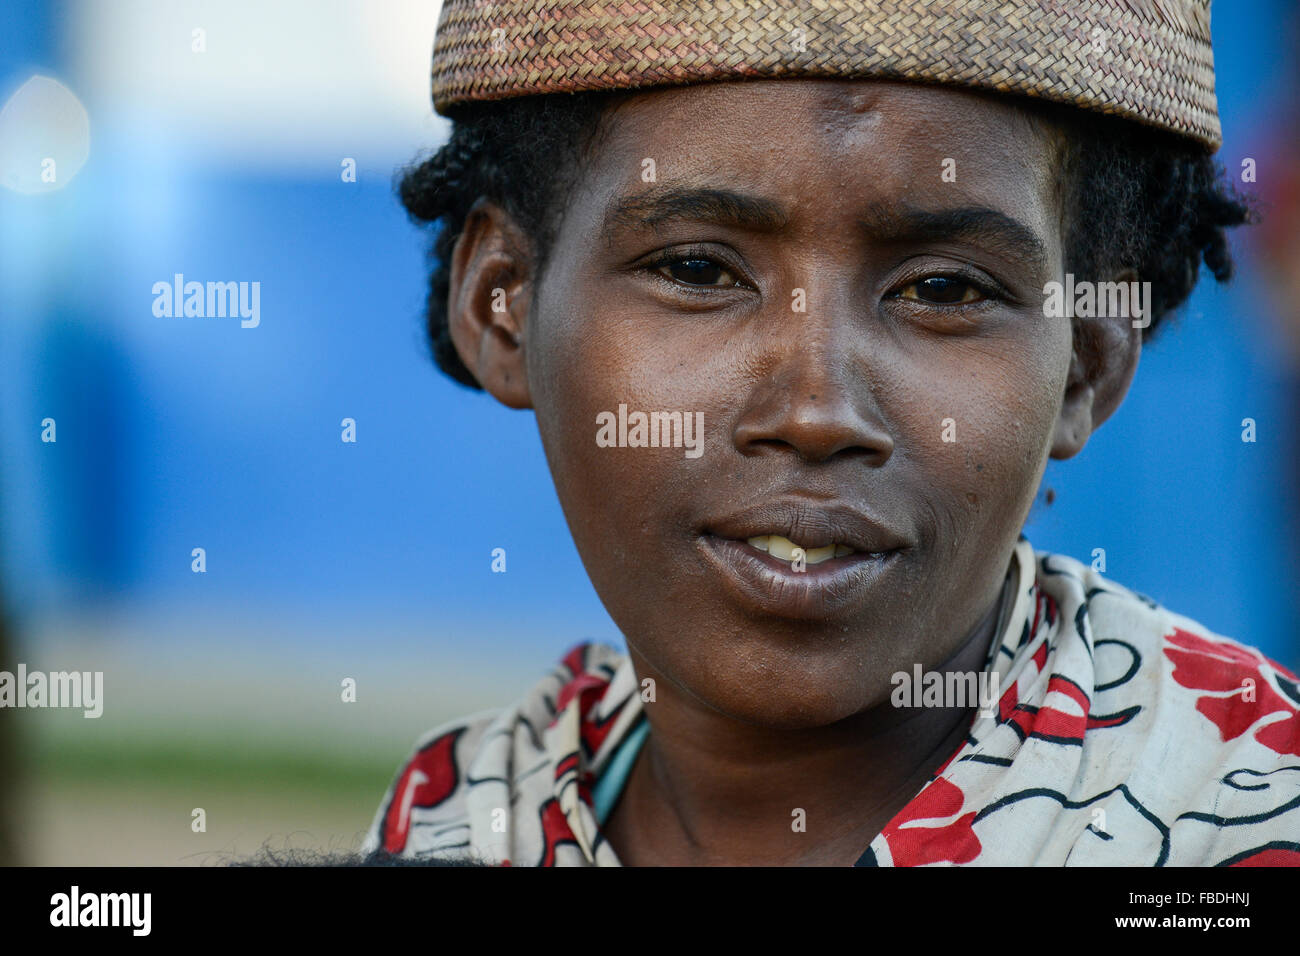 MADAGASCAR, Mananjary region, village, portrait of rural woman with bast hat Stock Photo